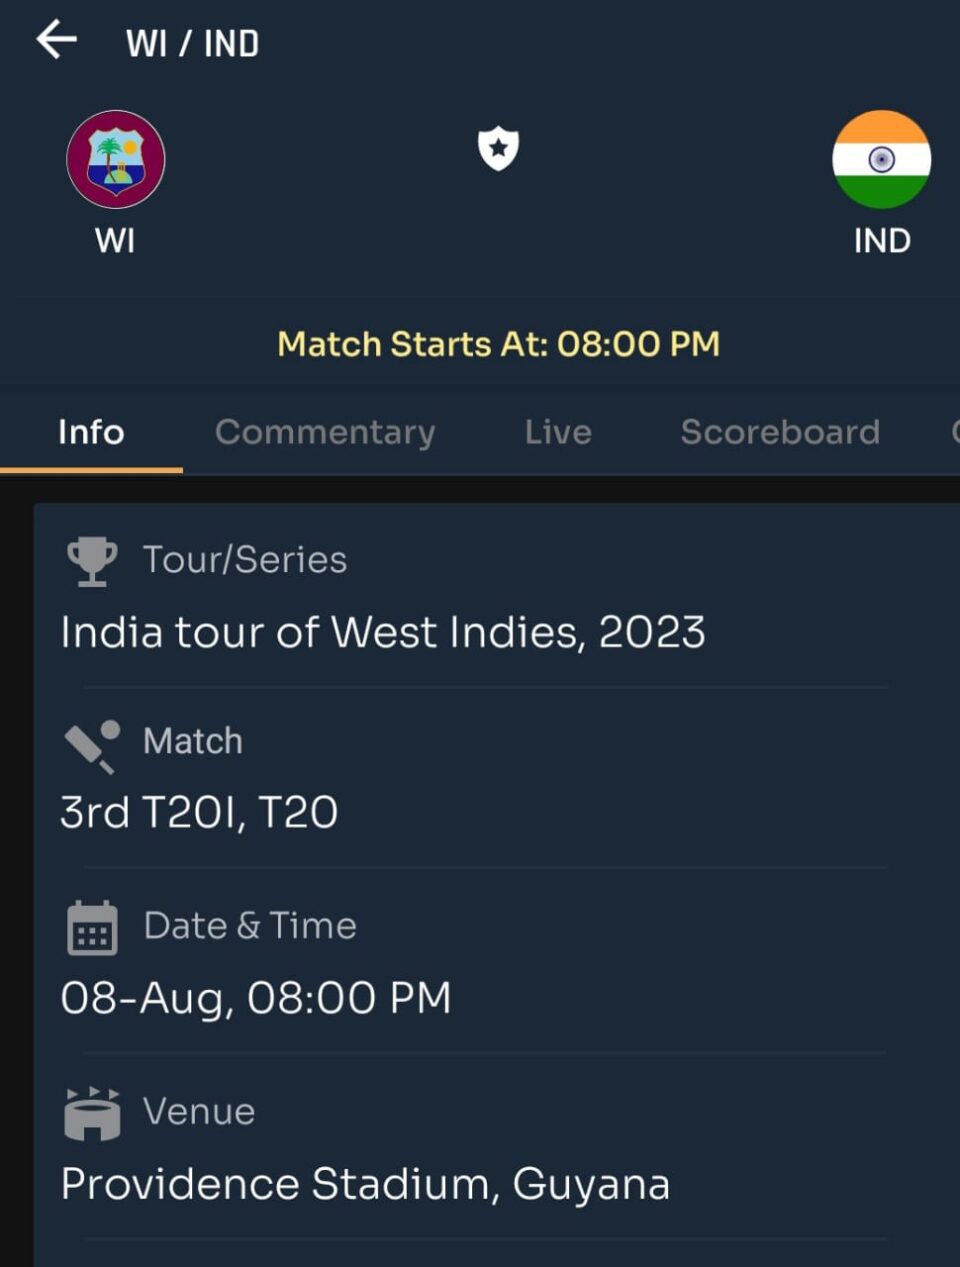 IND vs WI 3rd T20 Match Prediction: Toss Analysis, Pitch & Weather Report